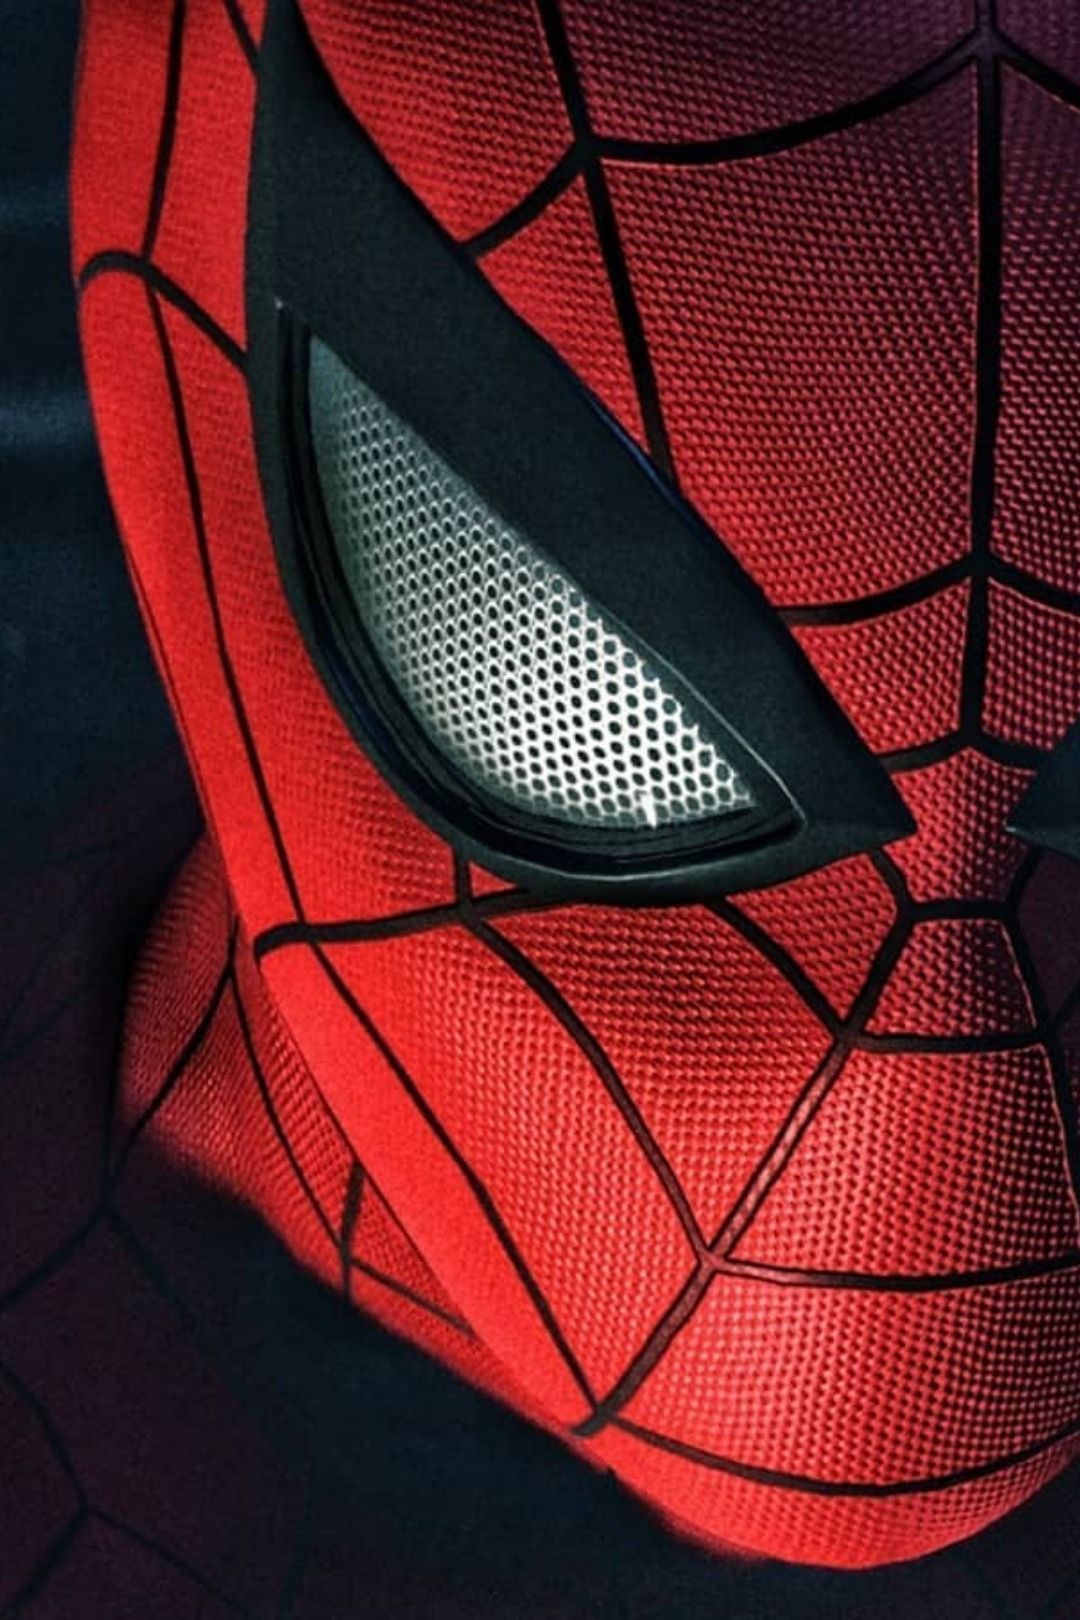 The Best Spiderman Wallpaper for your Smartphone Taken from